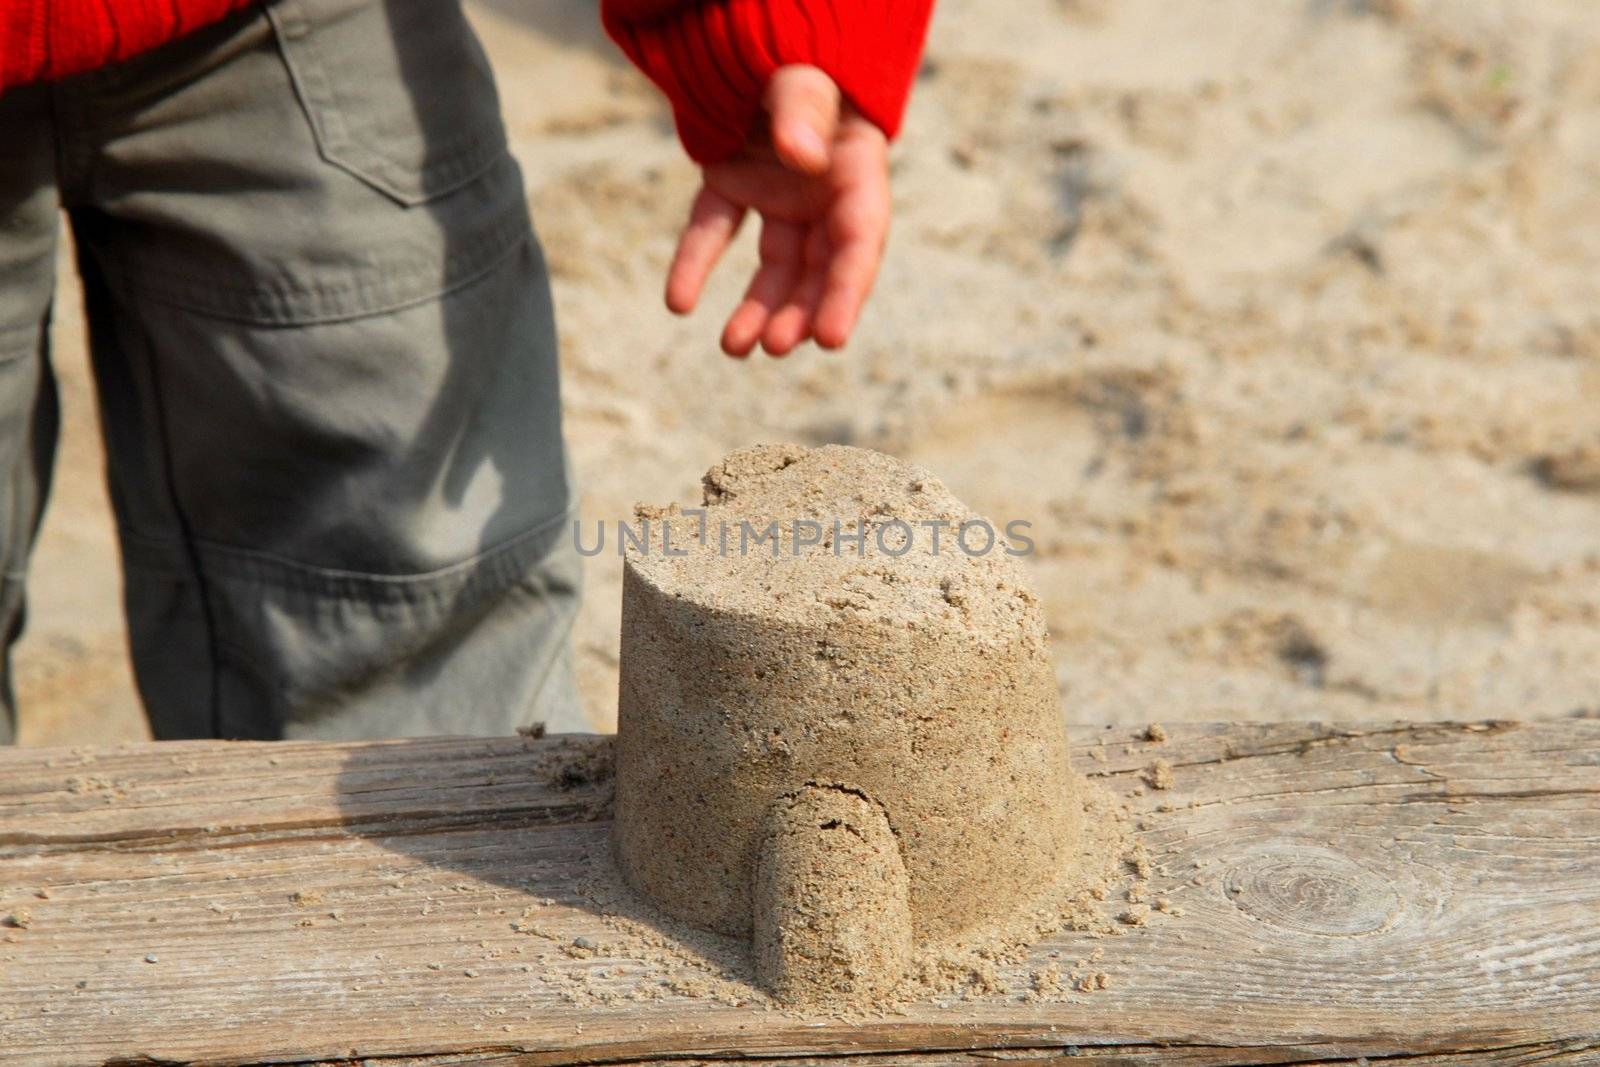 A child playing with the sand